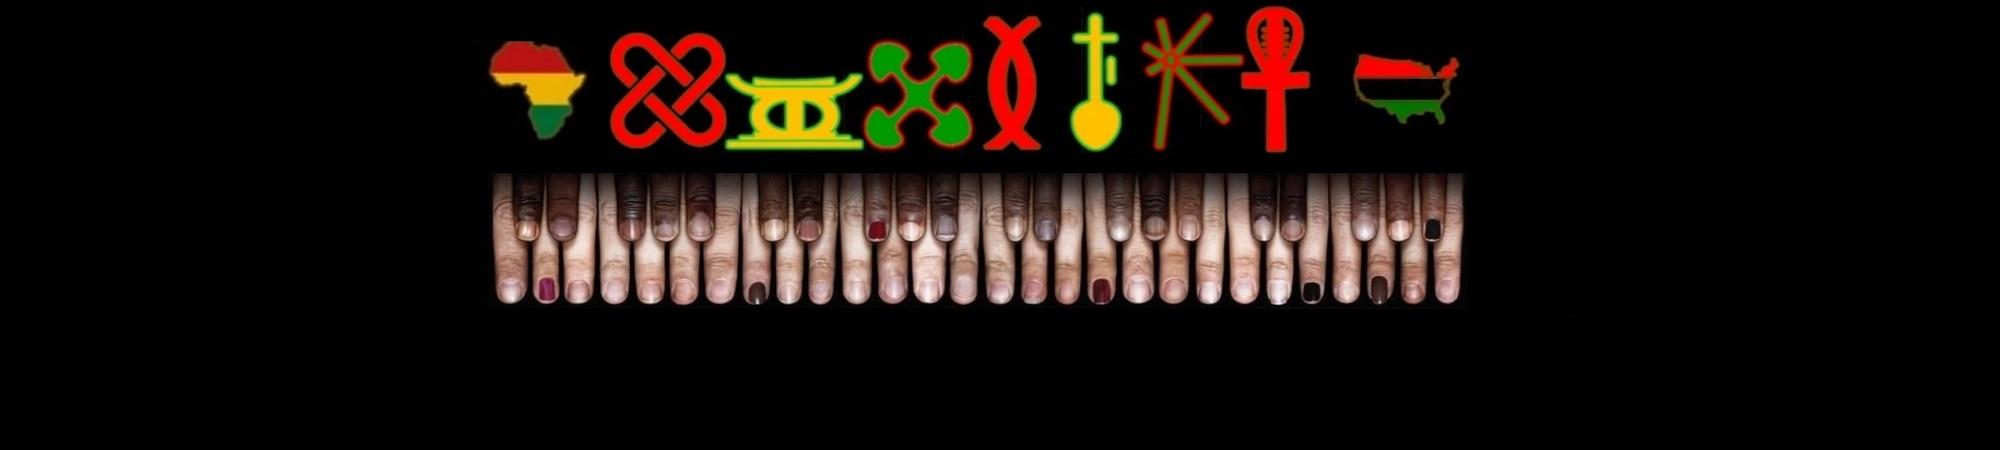 Kwanzaa symbols and a piano keyboard consisting of black and white fingers.